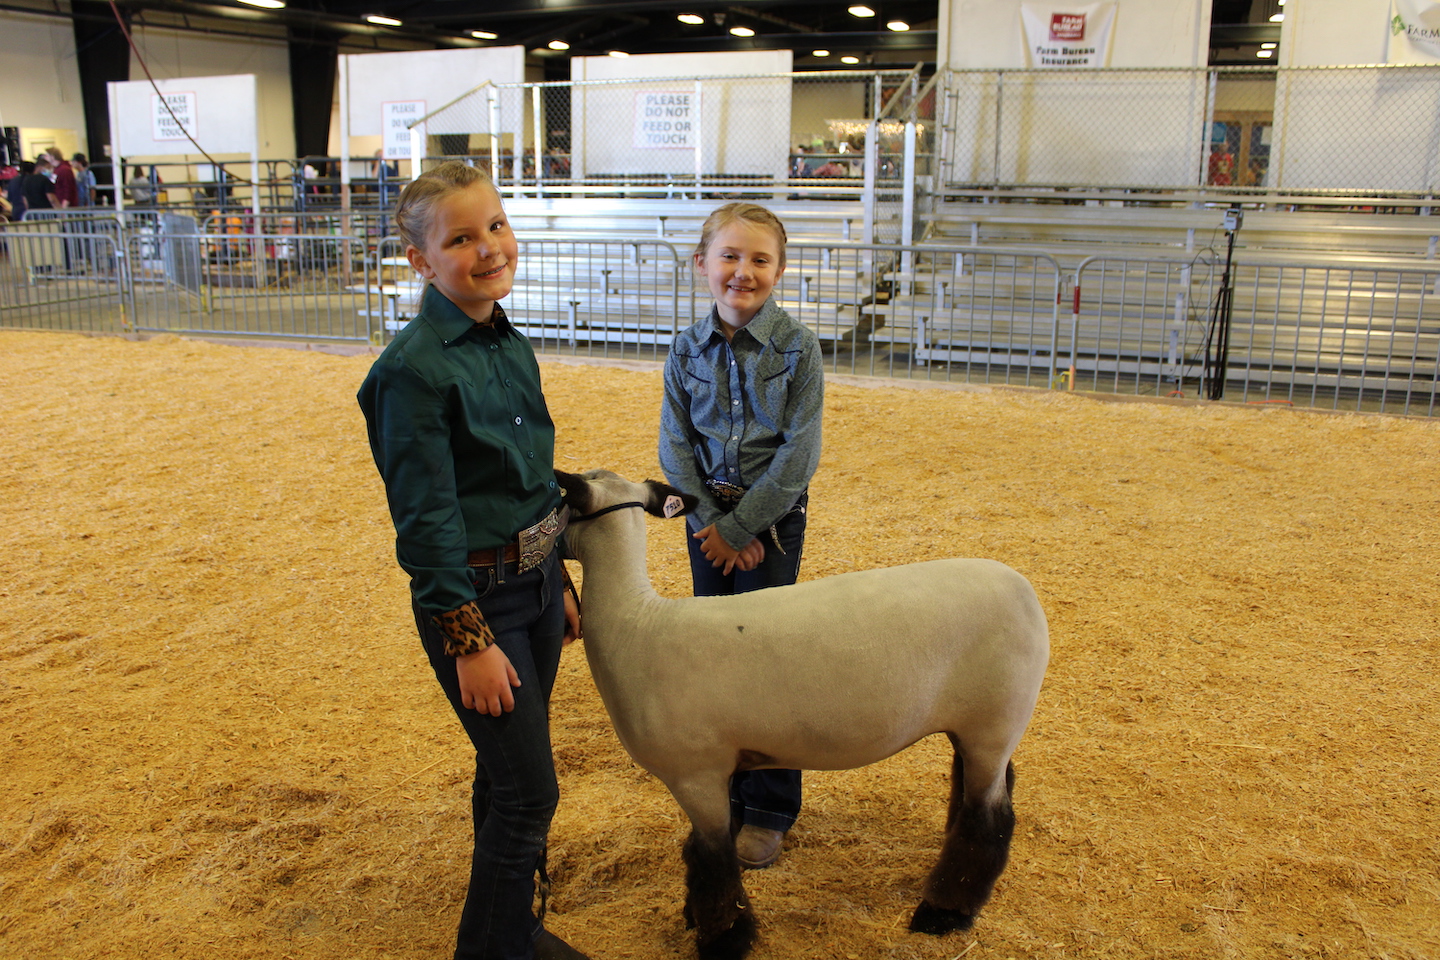 4-H members pose after the sheep show at the 2021 state fair.